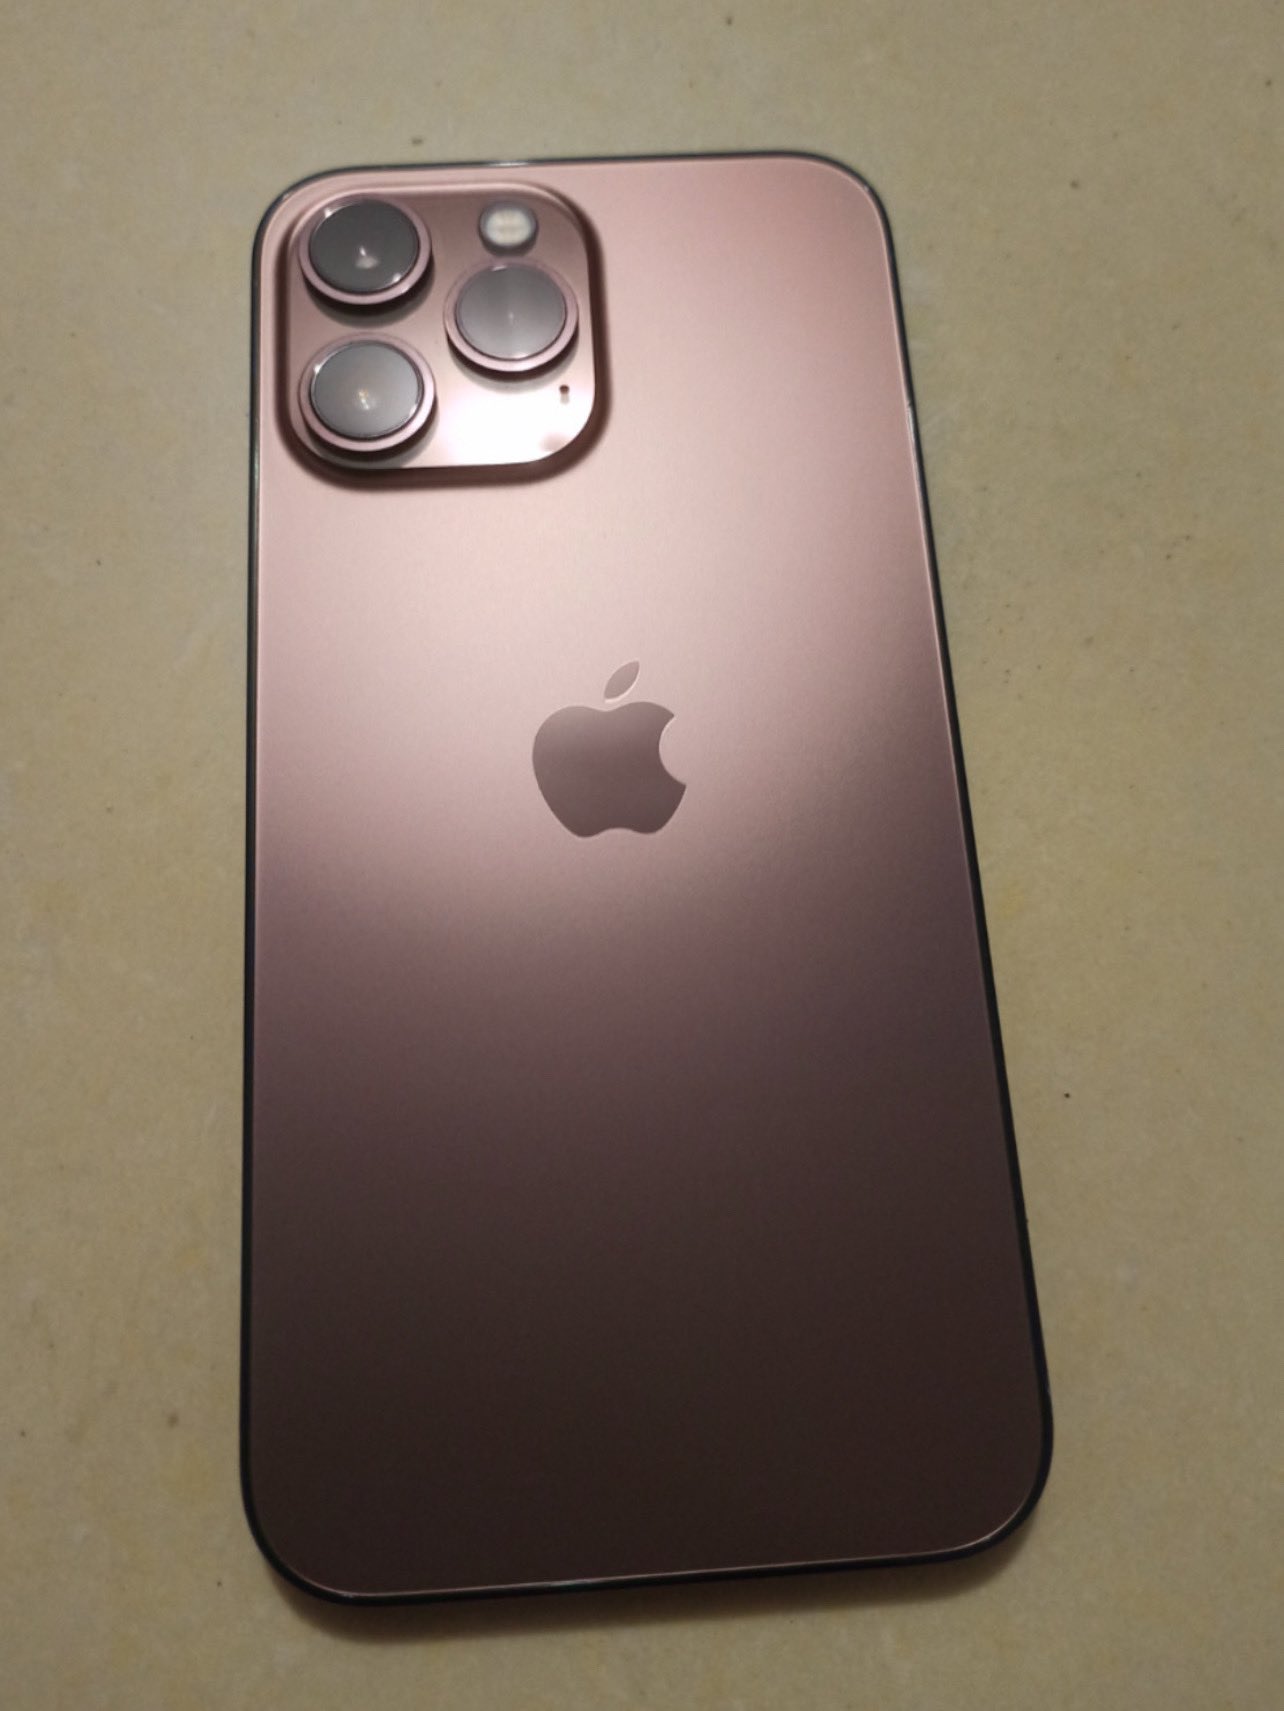 Suspected Prototype Shows IPhone 13 Pro In Rose Gold Color | SPARROWS NEWS